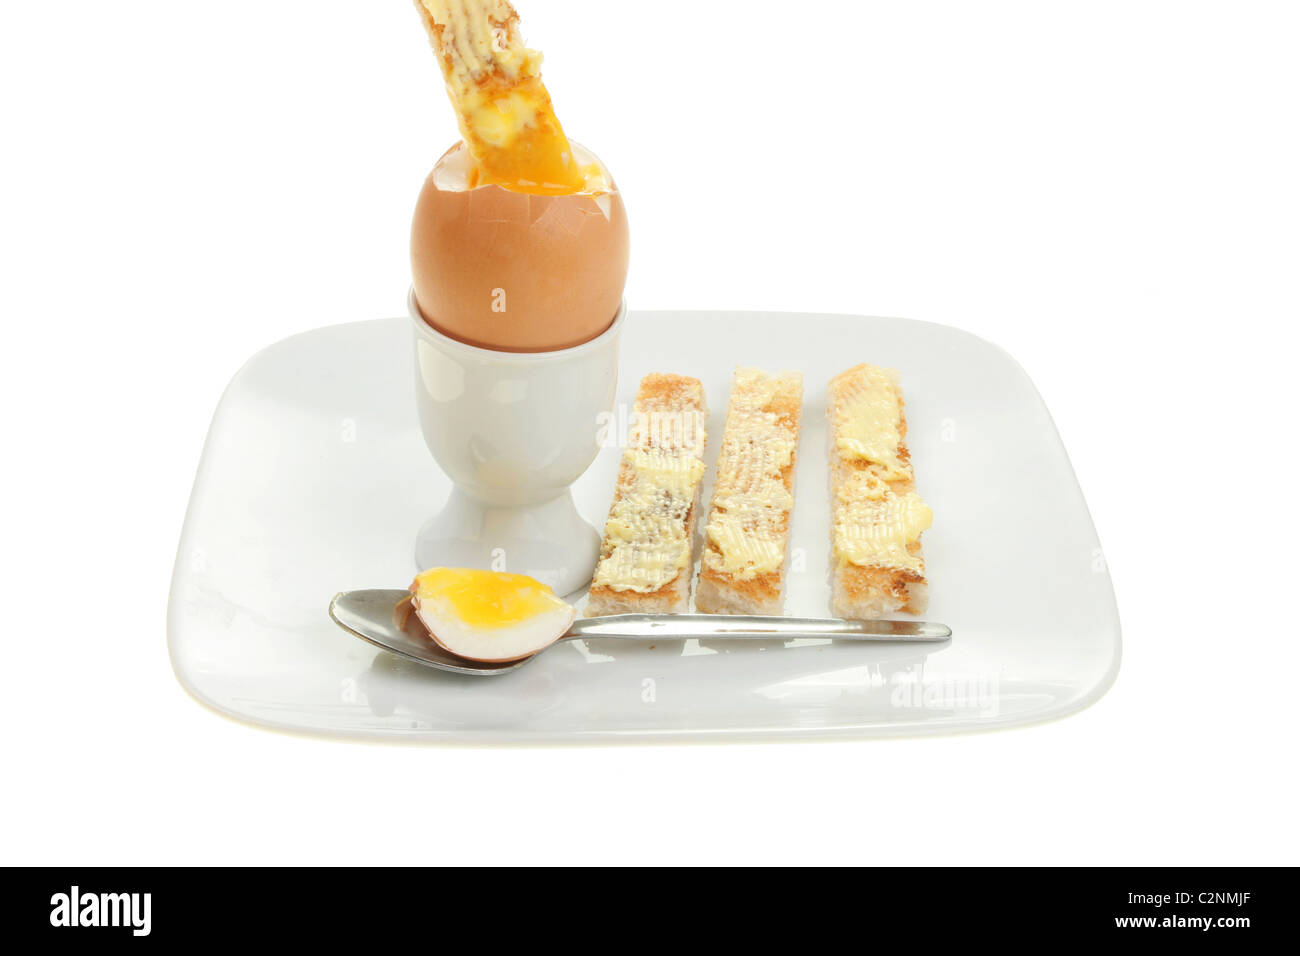 Boiled egg and toast soldiers on a plate isolated against white Stock Photo